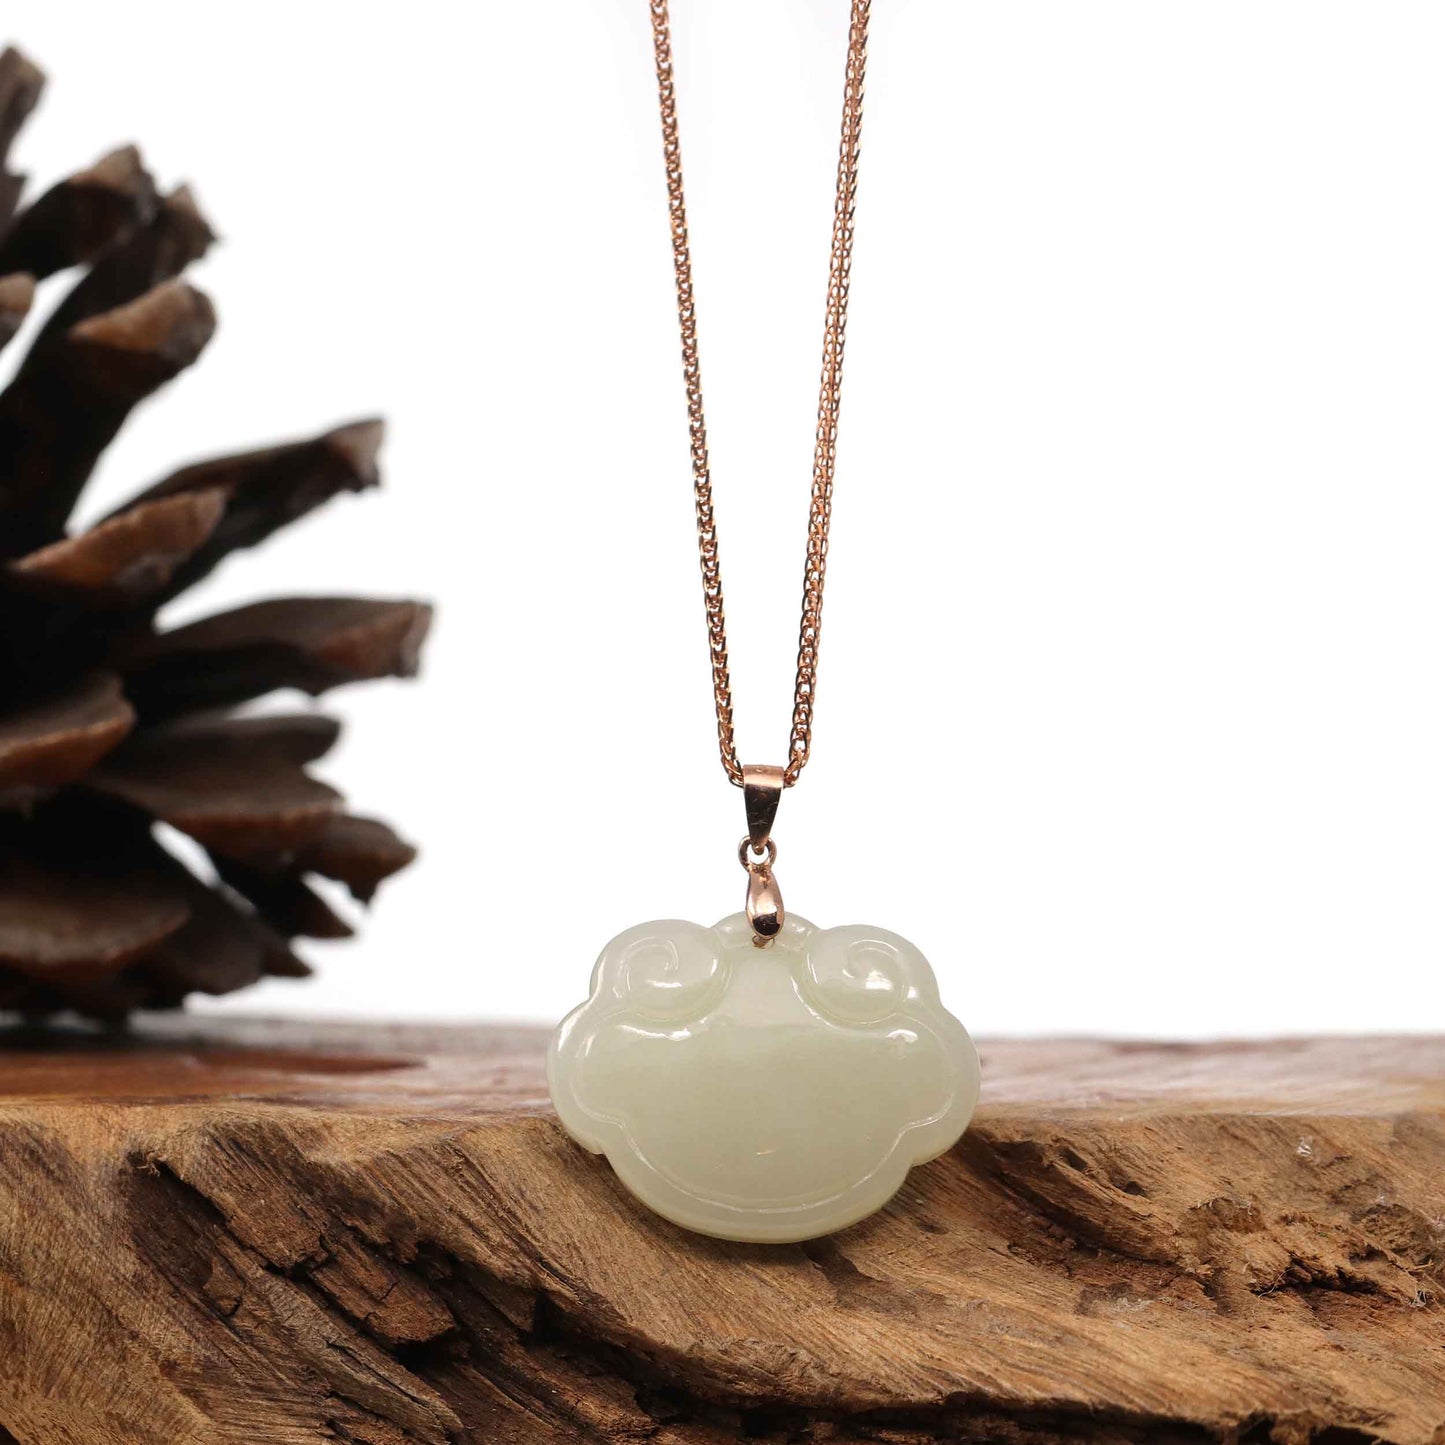 RealJade Co. Silver Gemstone Necklace Sterling Silver Genuine White Jade RuYi Pendant Necklace  with 18k Rose Gold Plated